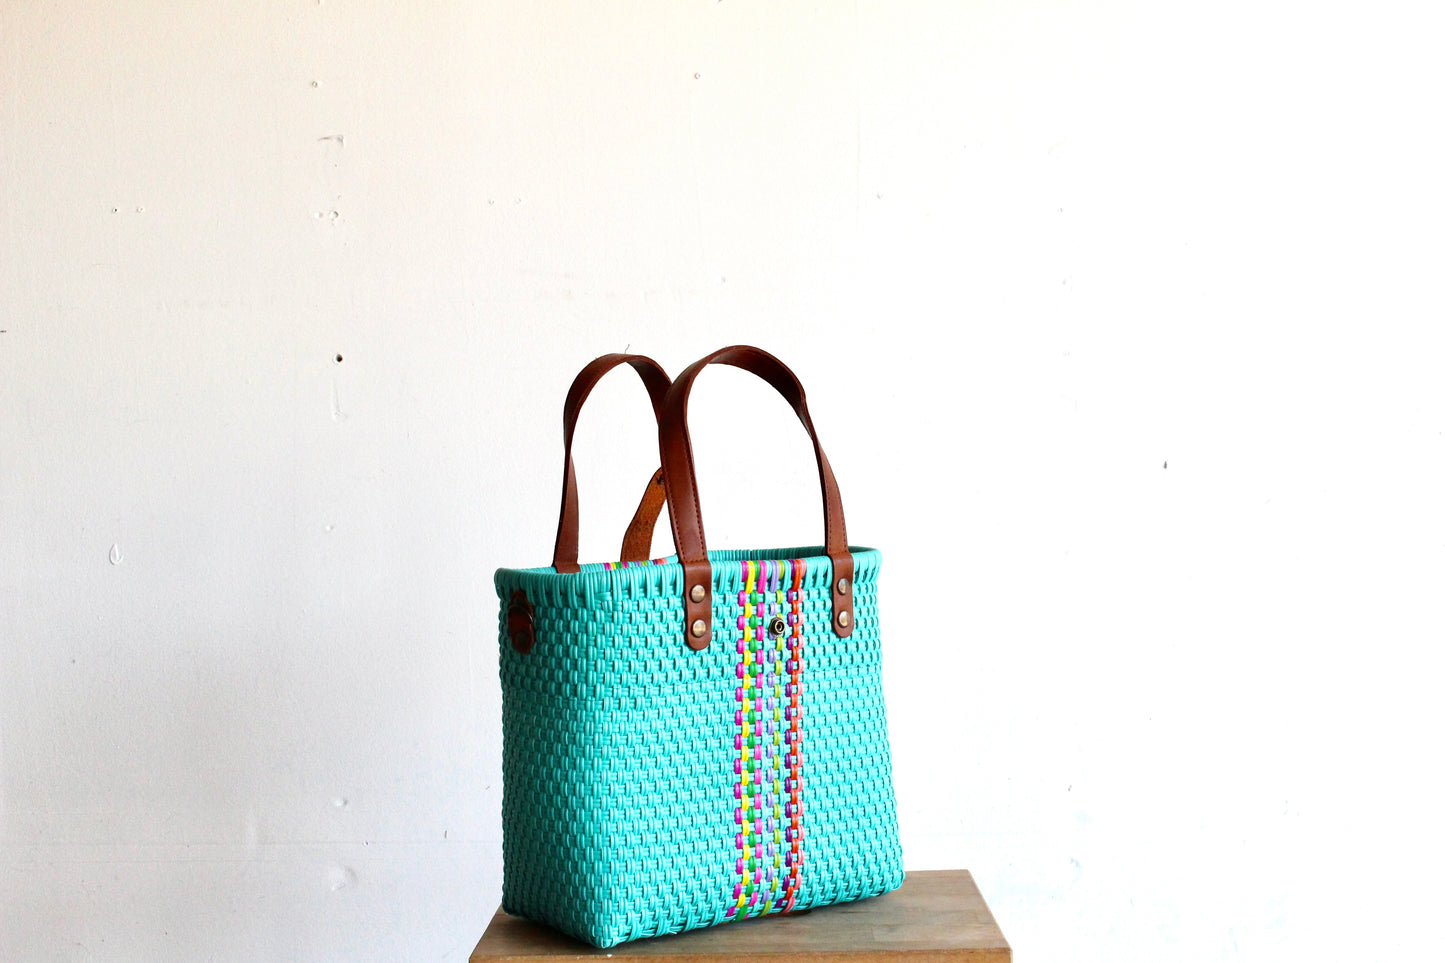 Teal & Colors Purse bag by MexiMexi